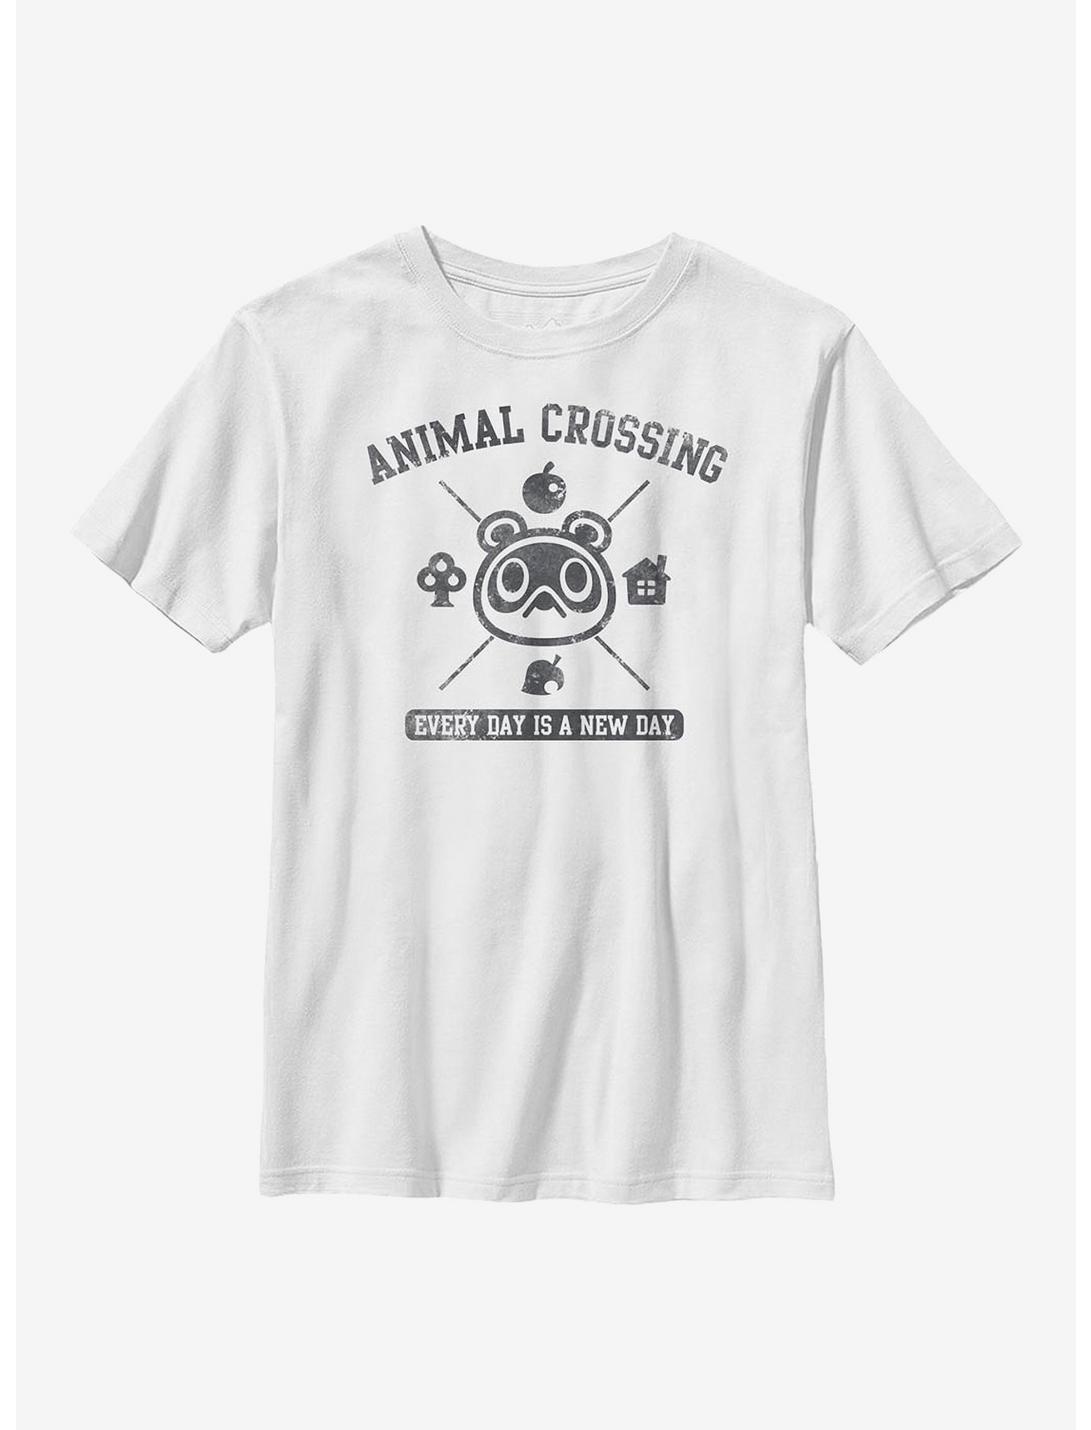 Animal Crossing Nook Every Day Youth T-Shirt, WHITE, hi-res